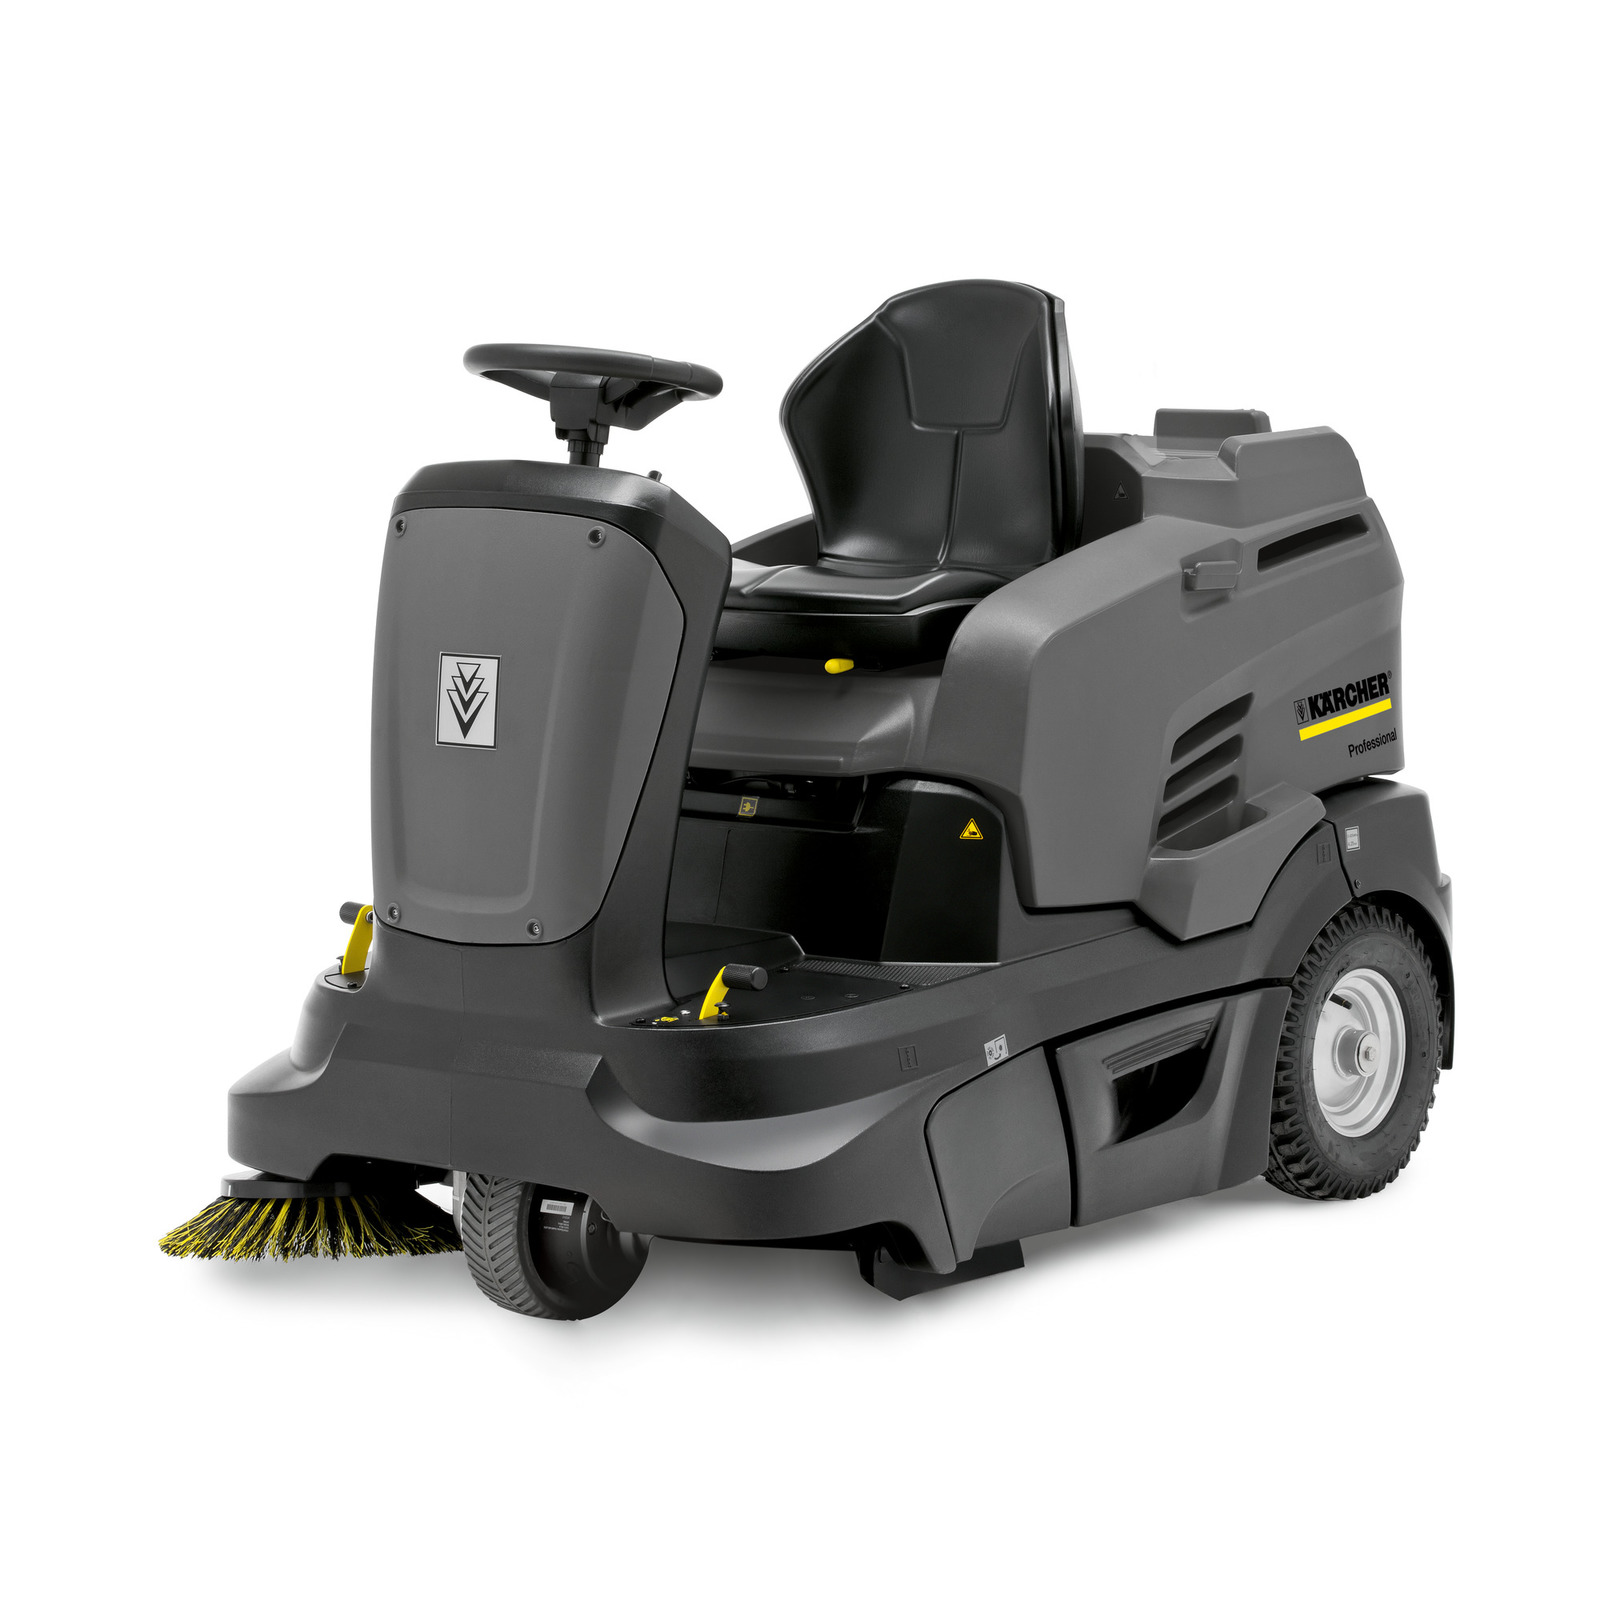 Km 90 60 R Bp Advanced Ride On Commercial Floor Sweeper Karcher